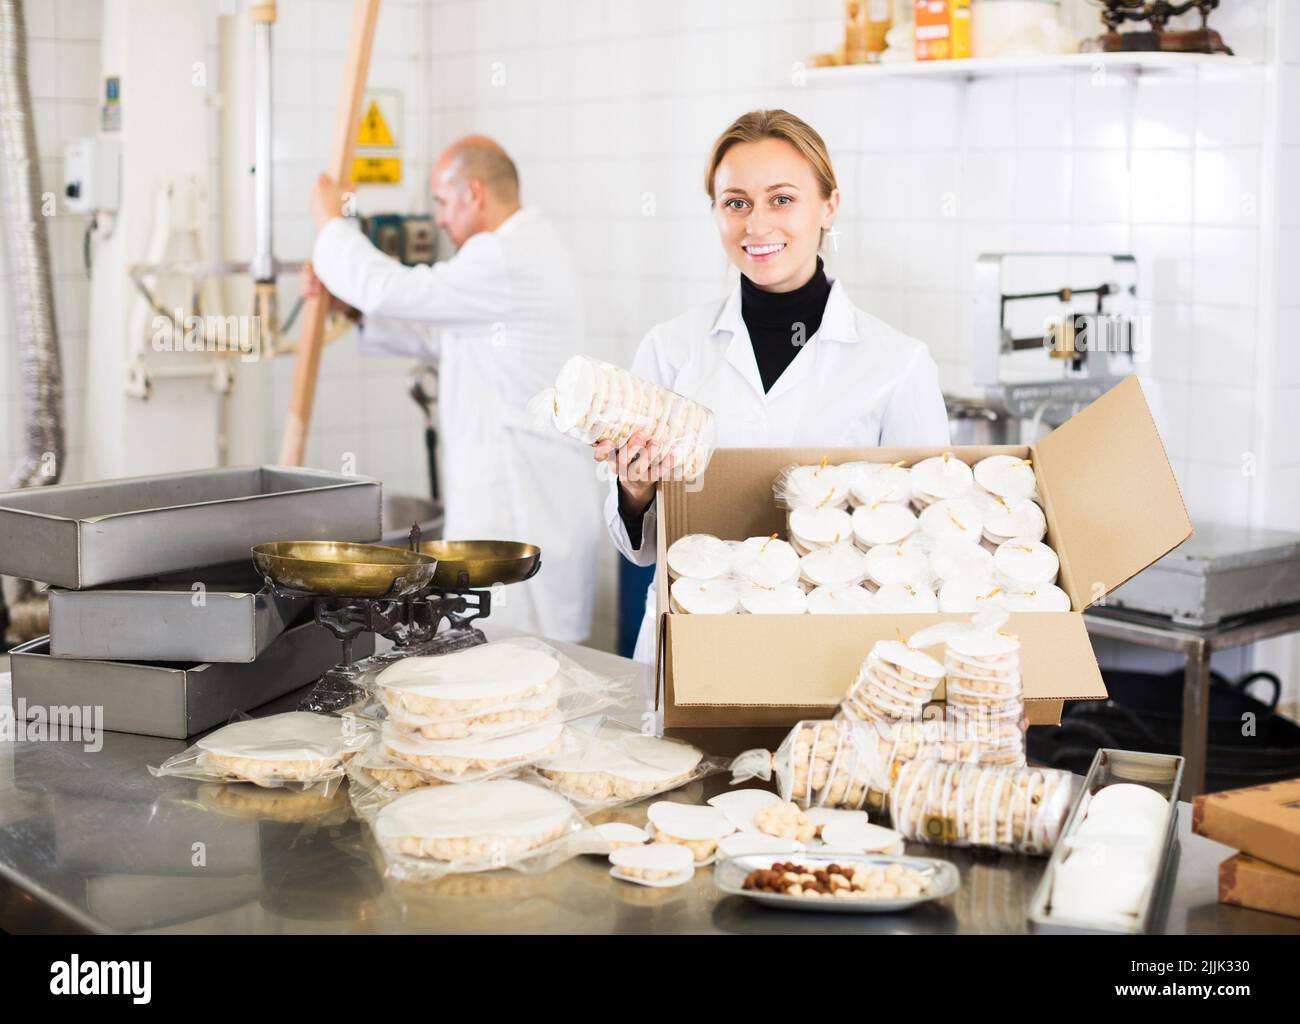 Workers kipping turron in food manufacture Stock Photo